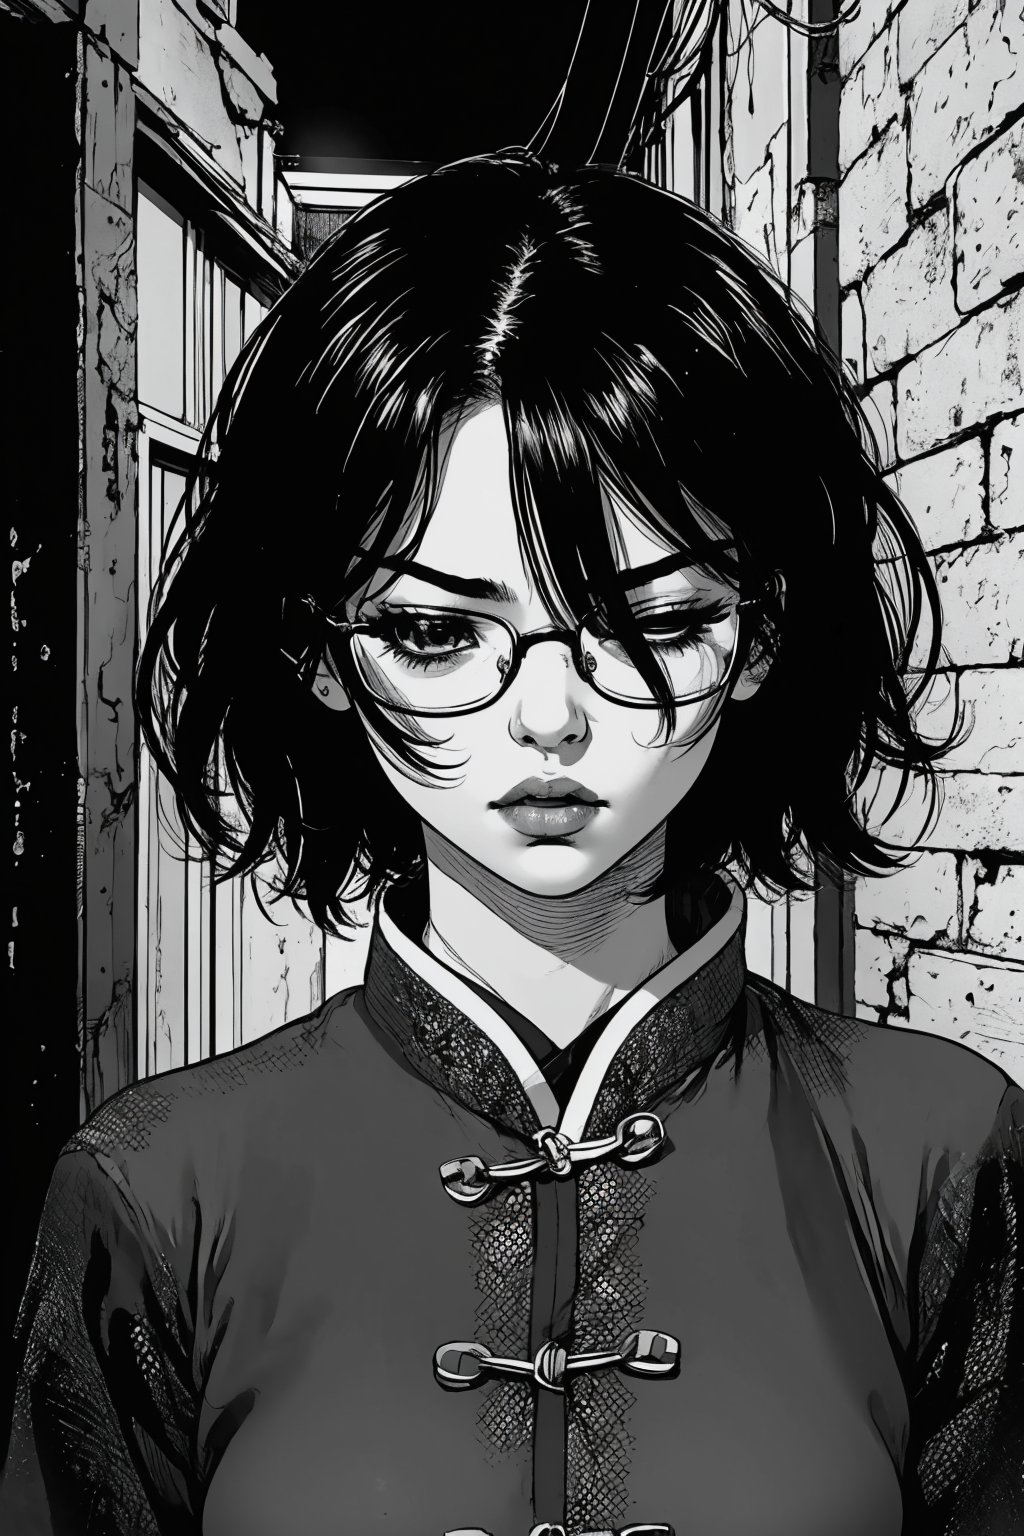 boichi manga style, monochrome, greyscale, in a corner of an alley, under dim street lights, solo, a girl, glasses, short hair, Chinese clothes, closed eyes, thoughtful expression, close up view, ((masterpiece))